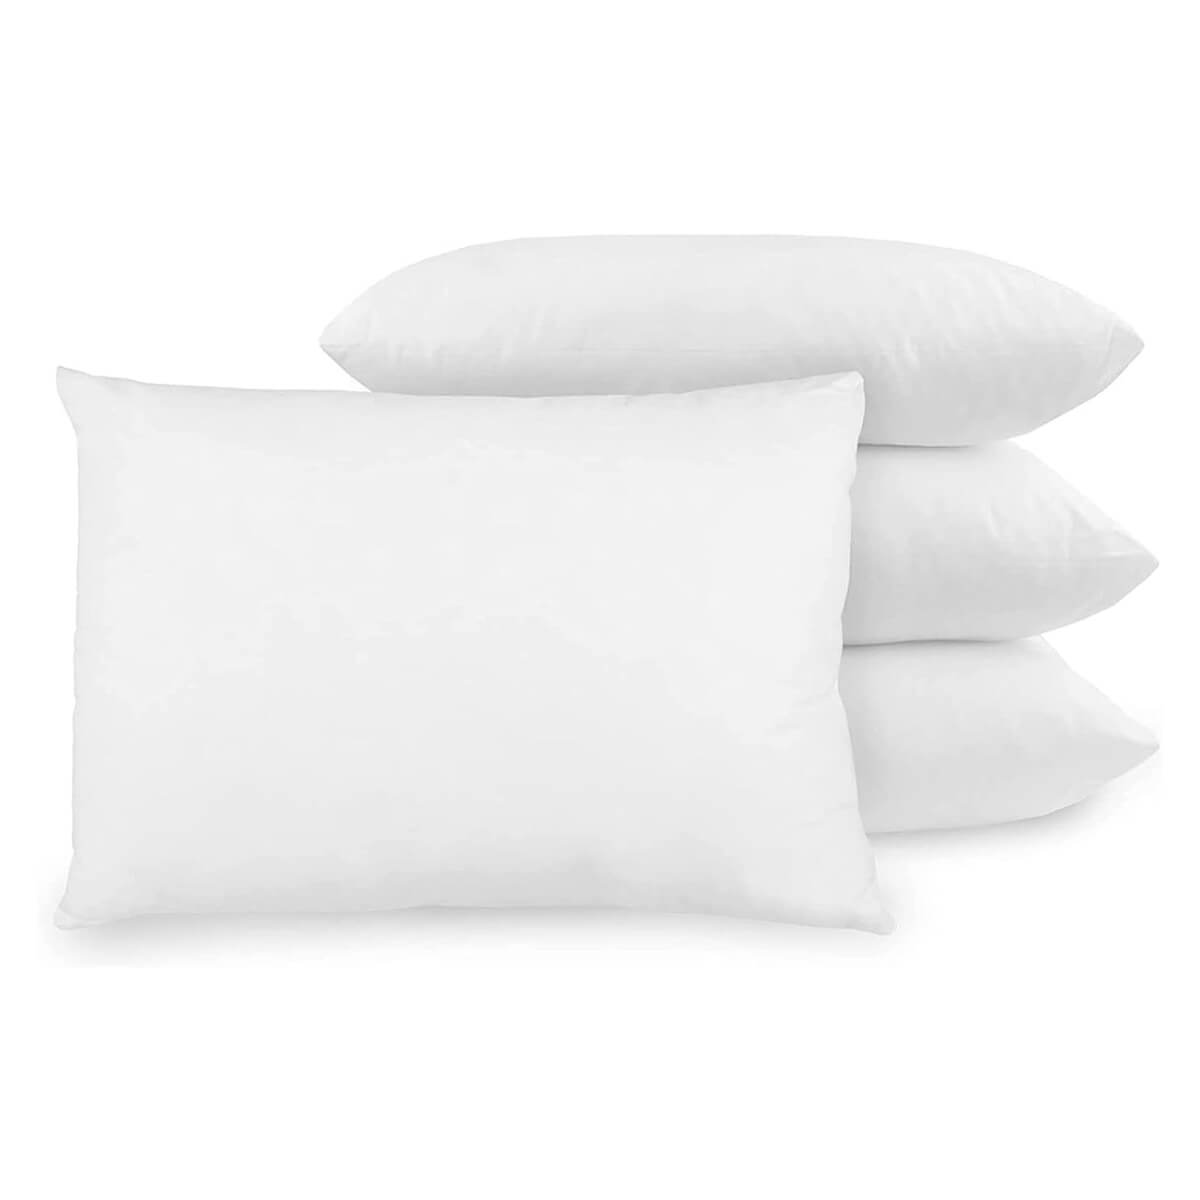 Luxury 2-Pack Hotel Quality Pillows - Soft Support, Anti-Allergy, Extra Filled for All Sleep Positions